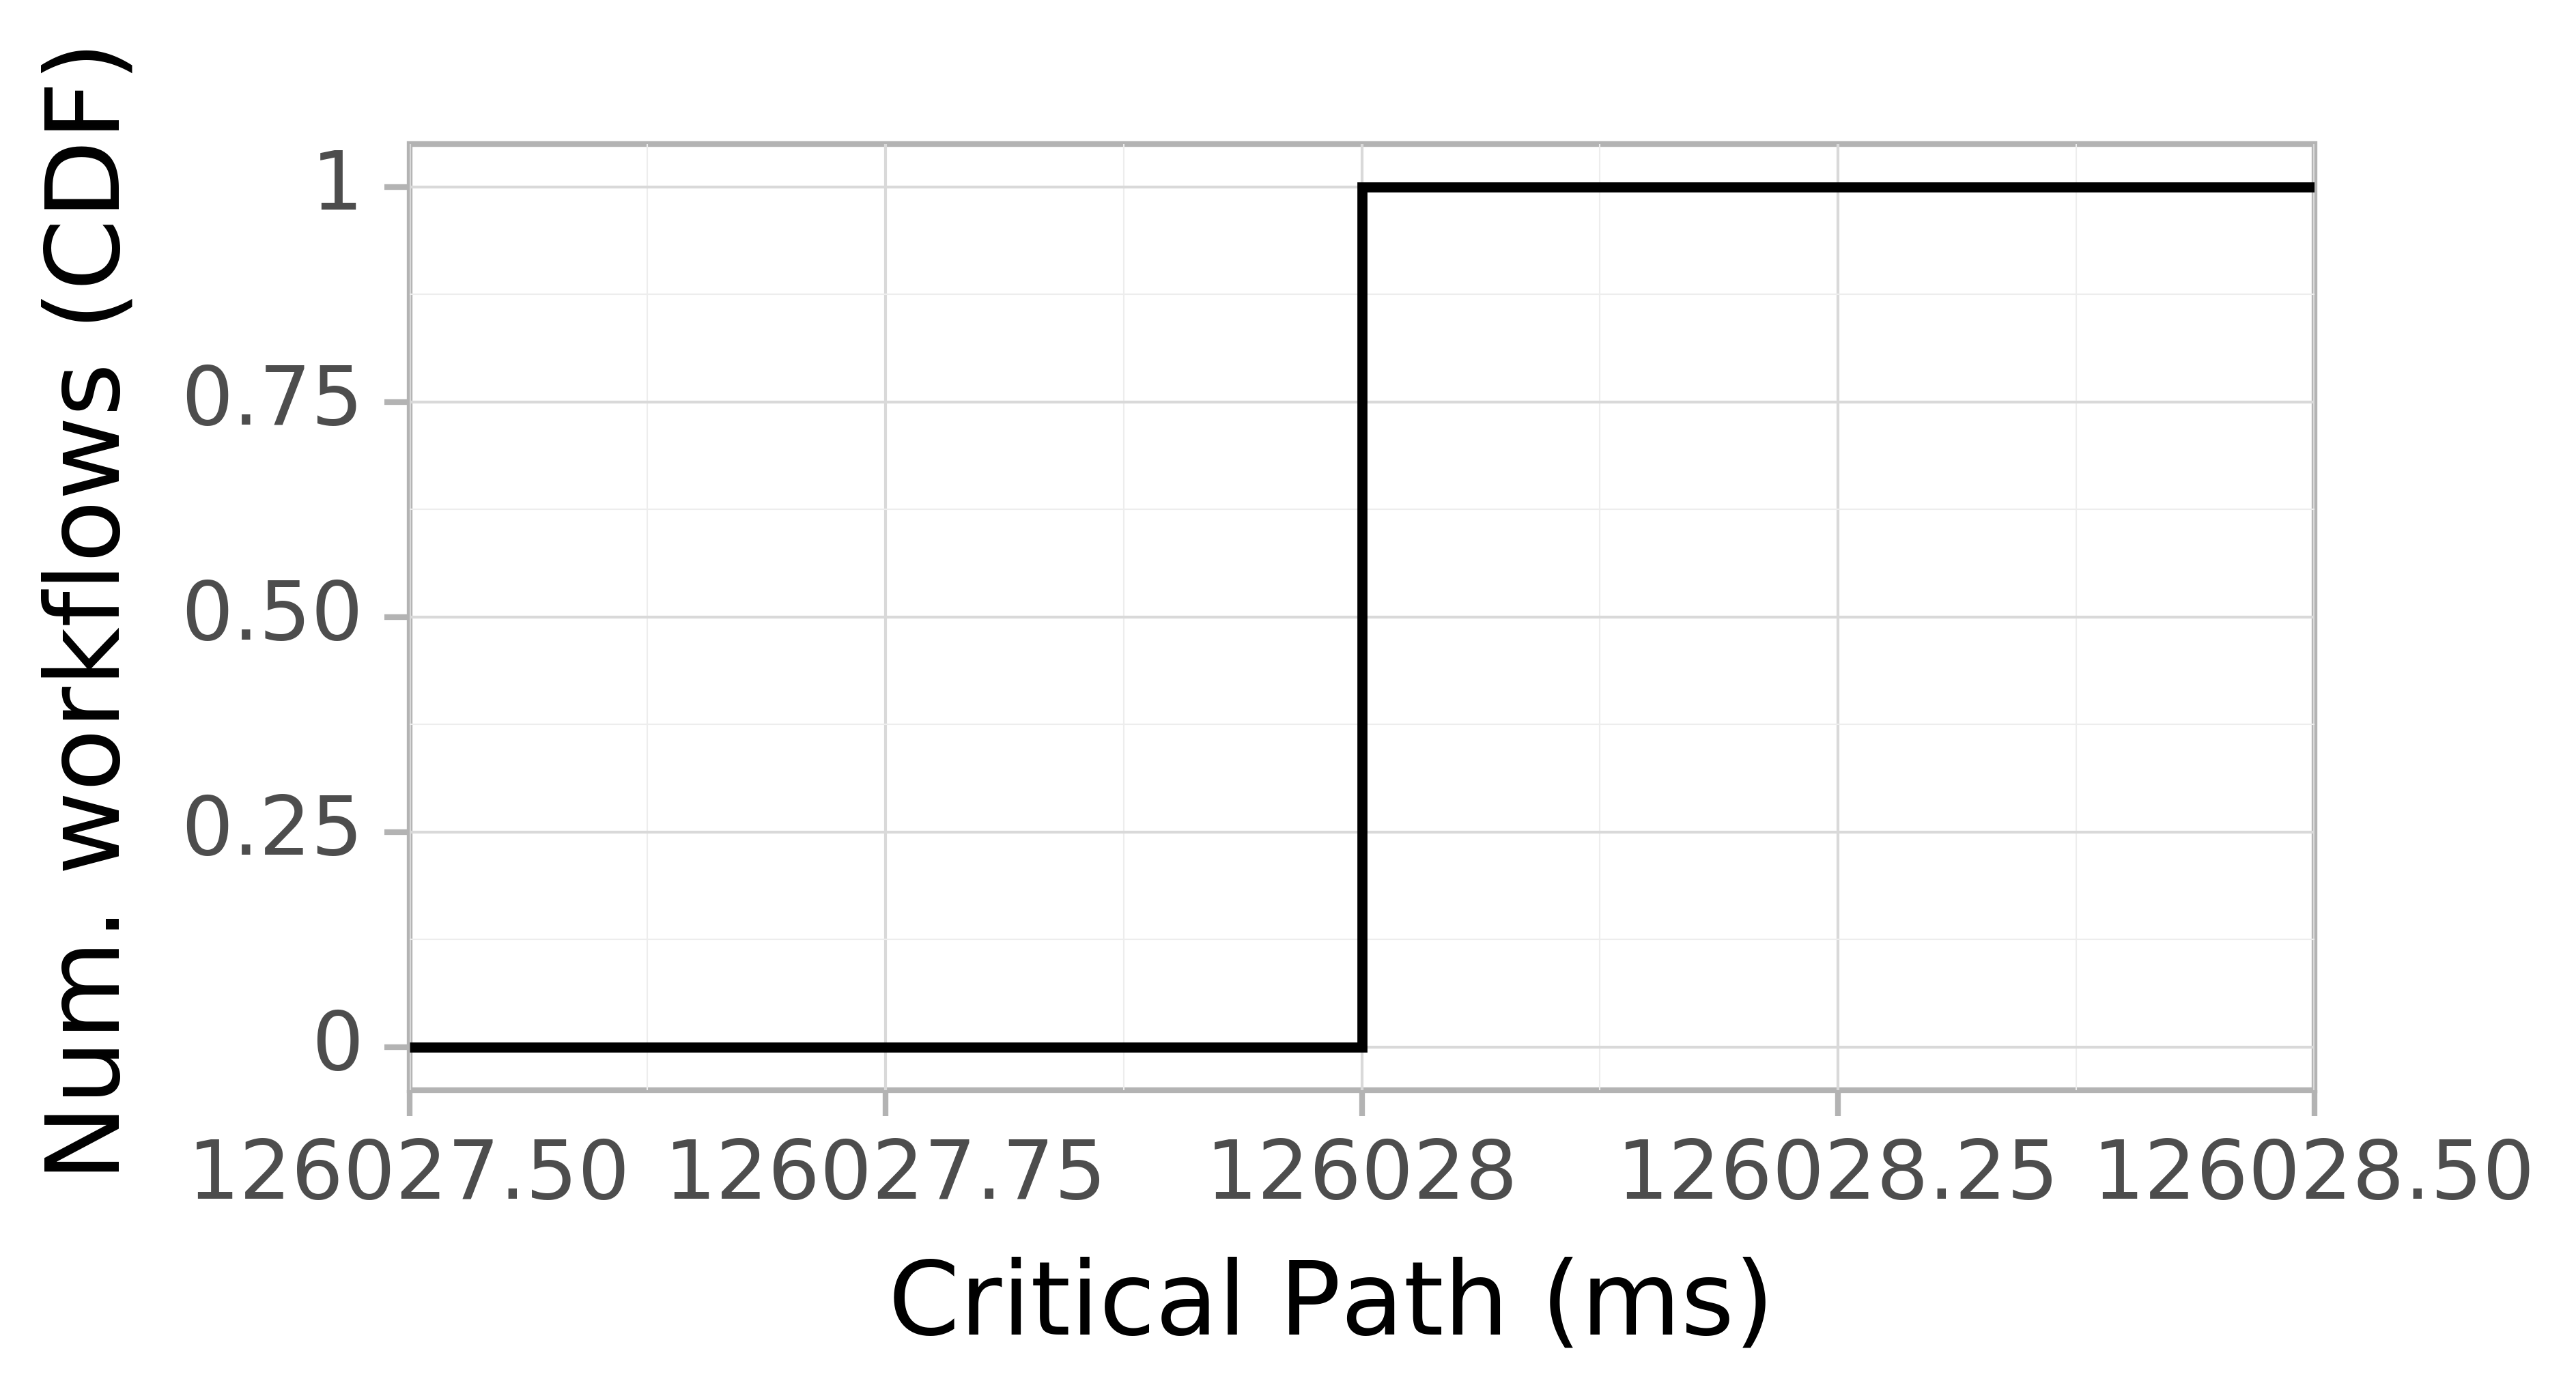 Job runtime CDF graph for the Pegasus_P8 trace.